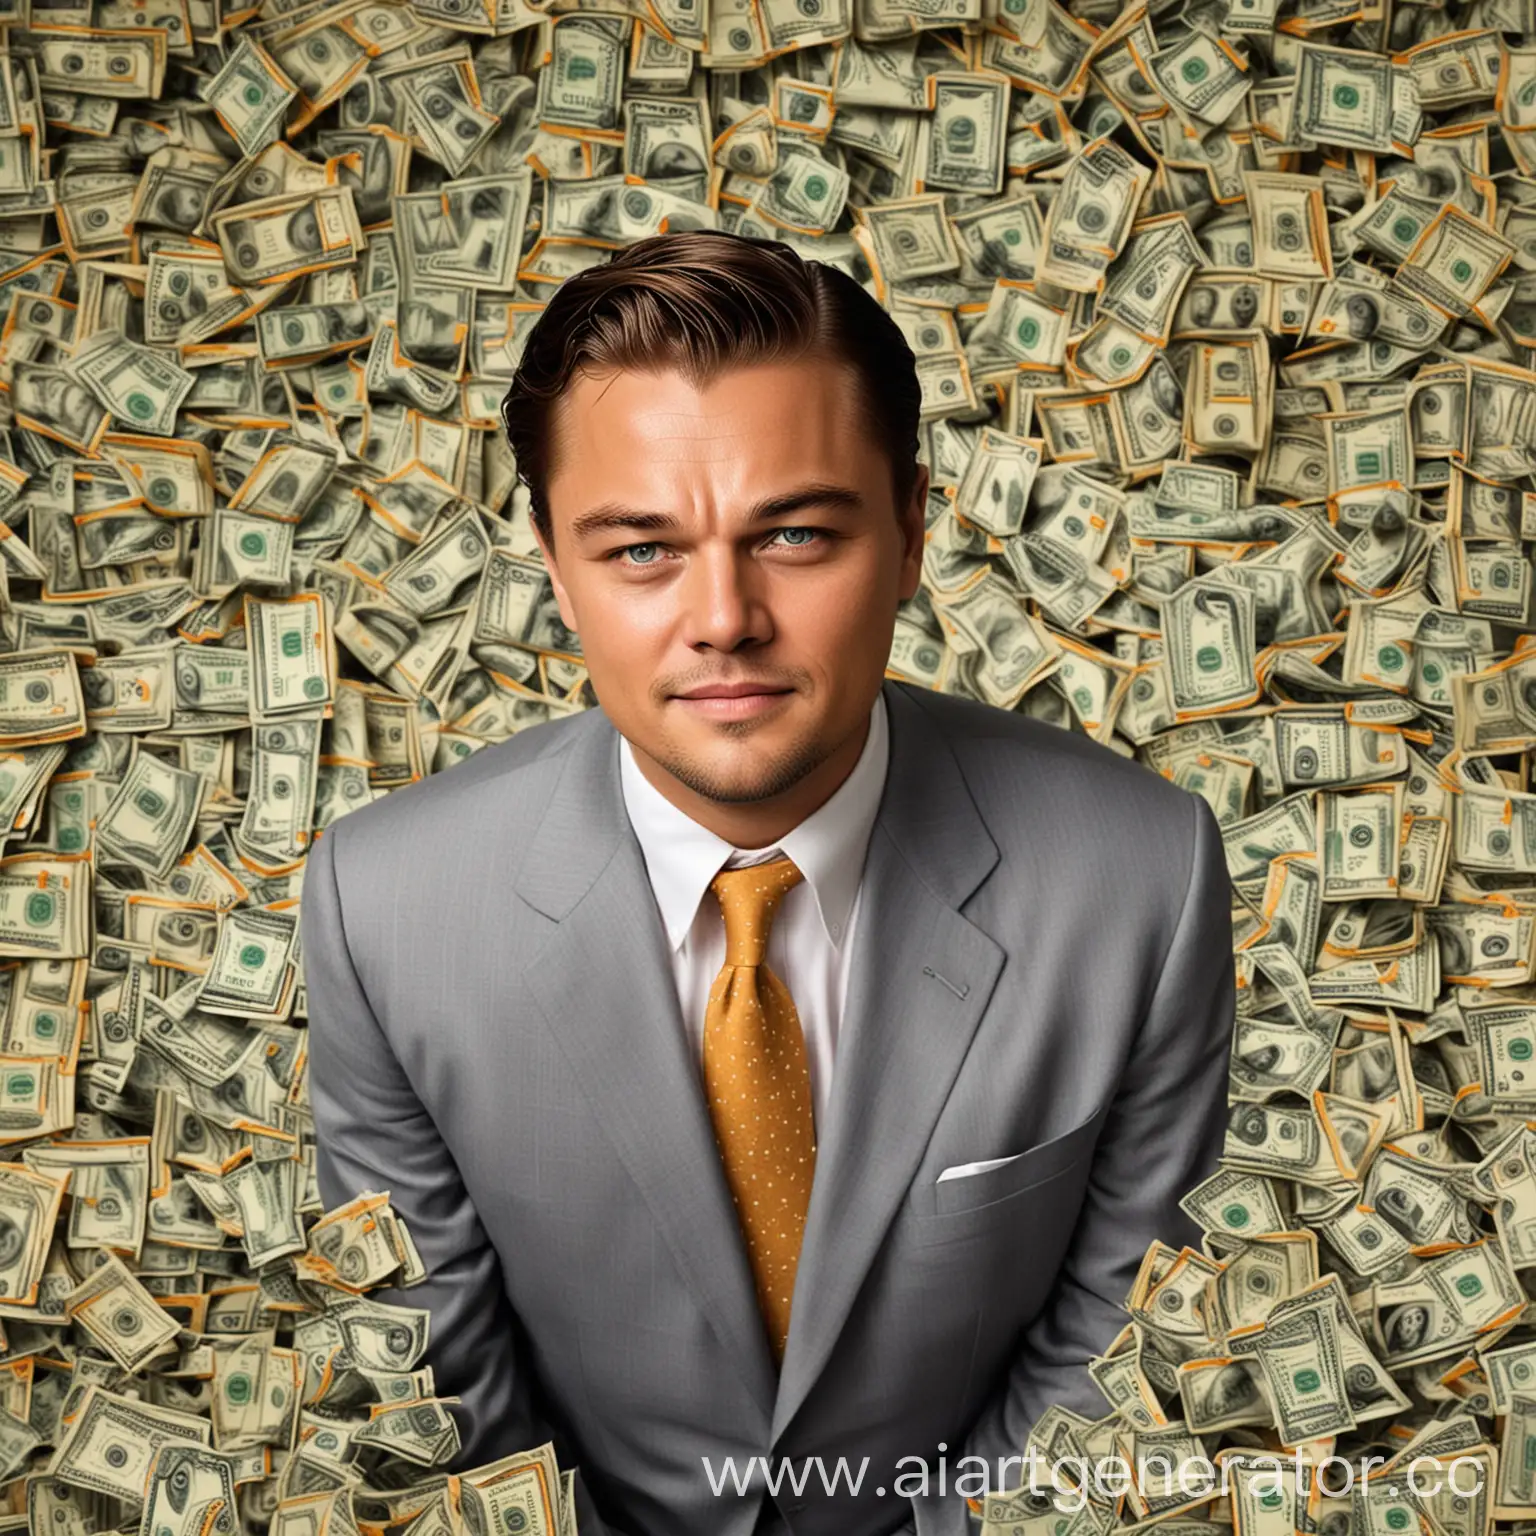 Leonardo-DiCaprio-Surrounded-by-Wealth-in-Wolf-of-Wall-Street-Scene